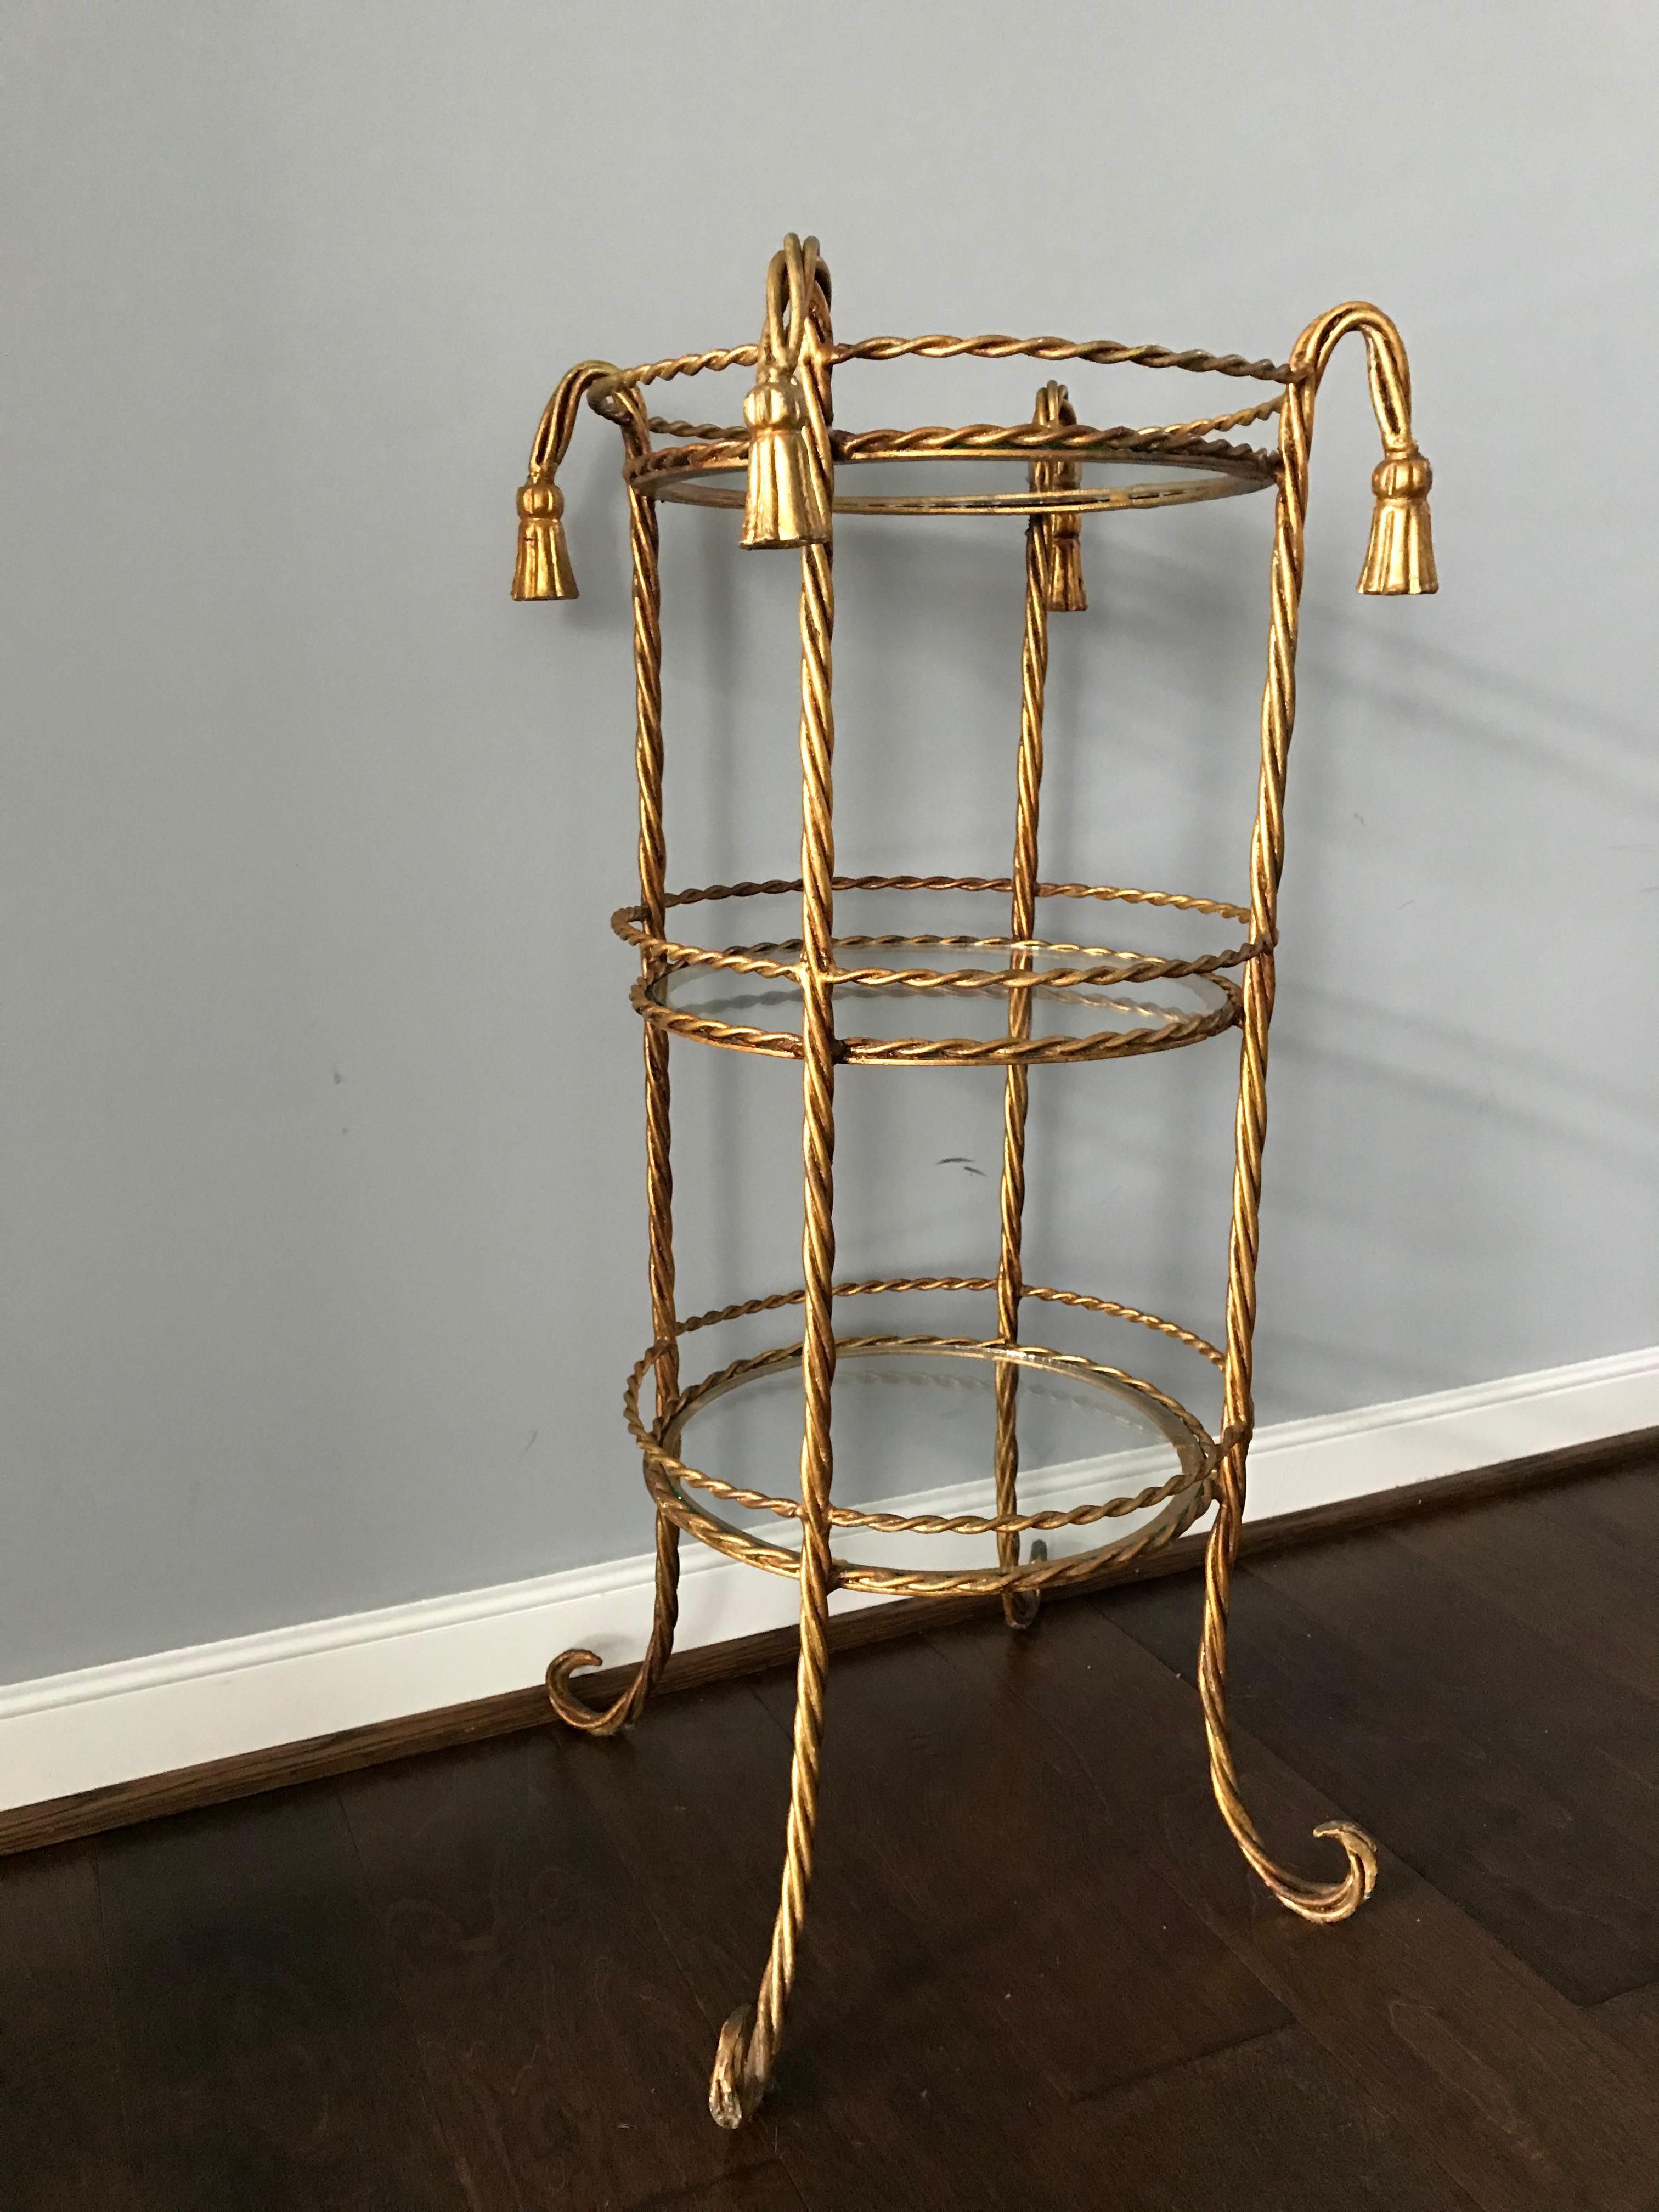 Offered is a gorgeous, 1970s Italian gilt-metal three-tiered table with an allover rope and tassel motif. Three new glass shelves. Measures: 9.25in between shelves.